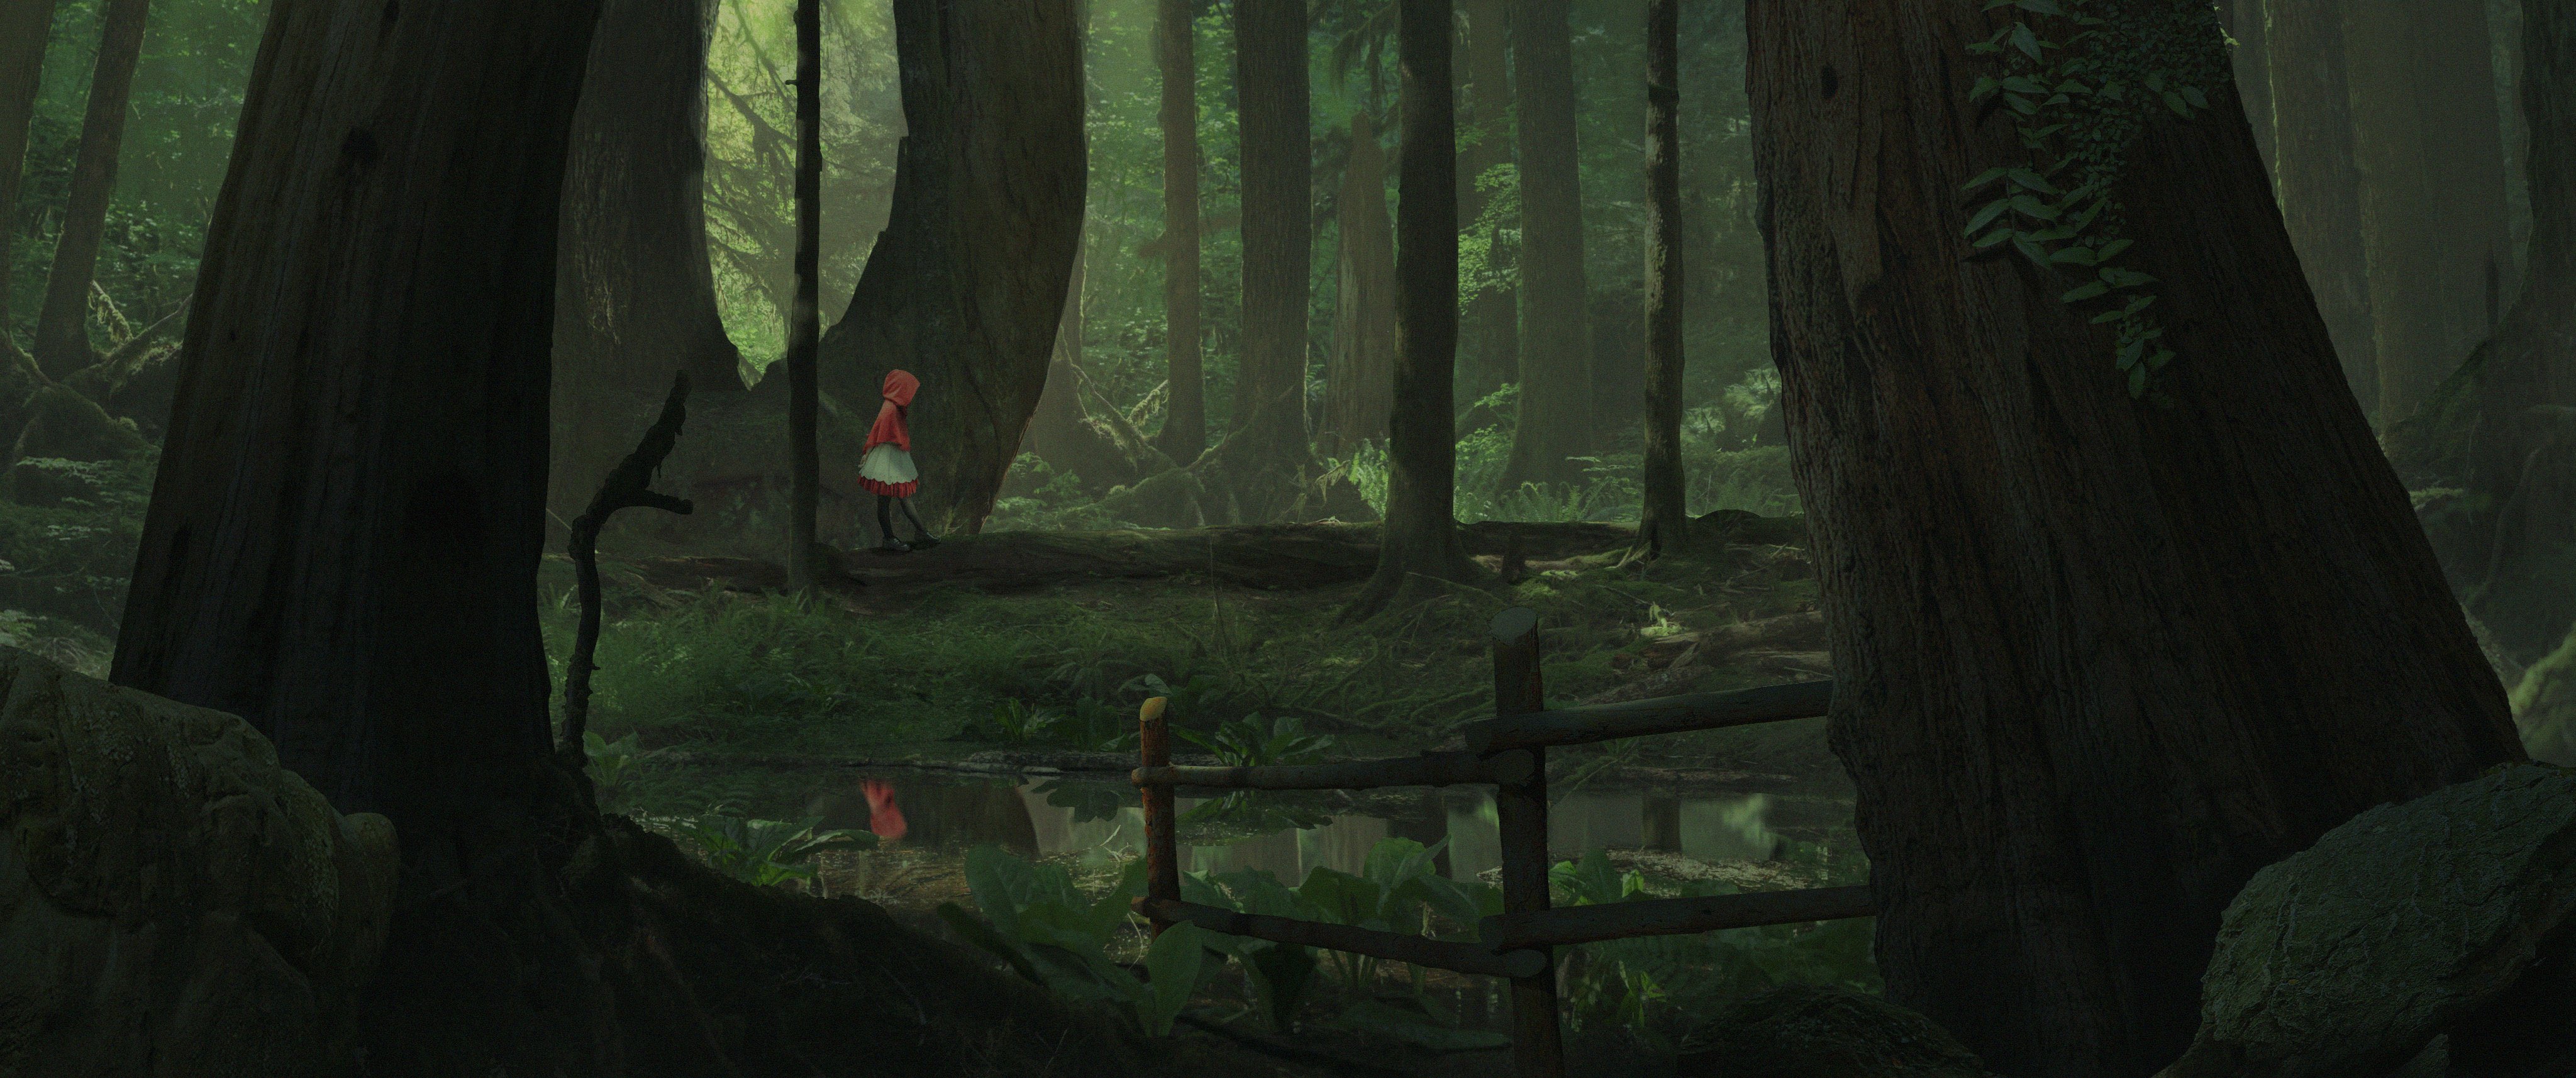 Photobash piece by Della Annabel showing Little Red Ridding Hood in a forest